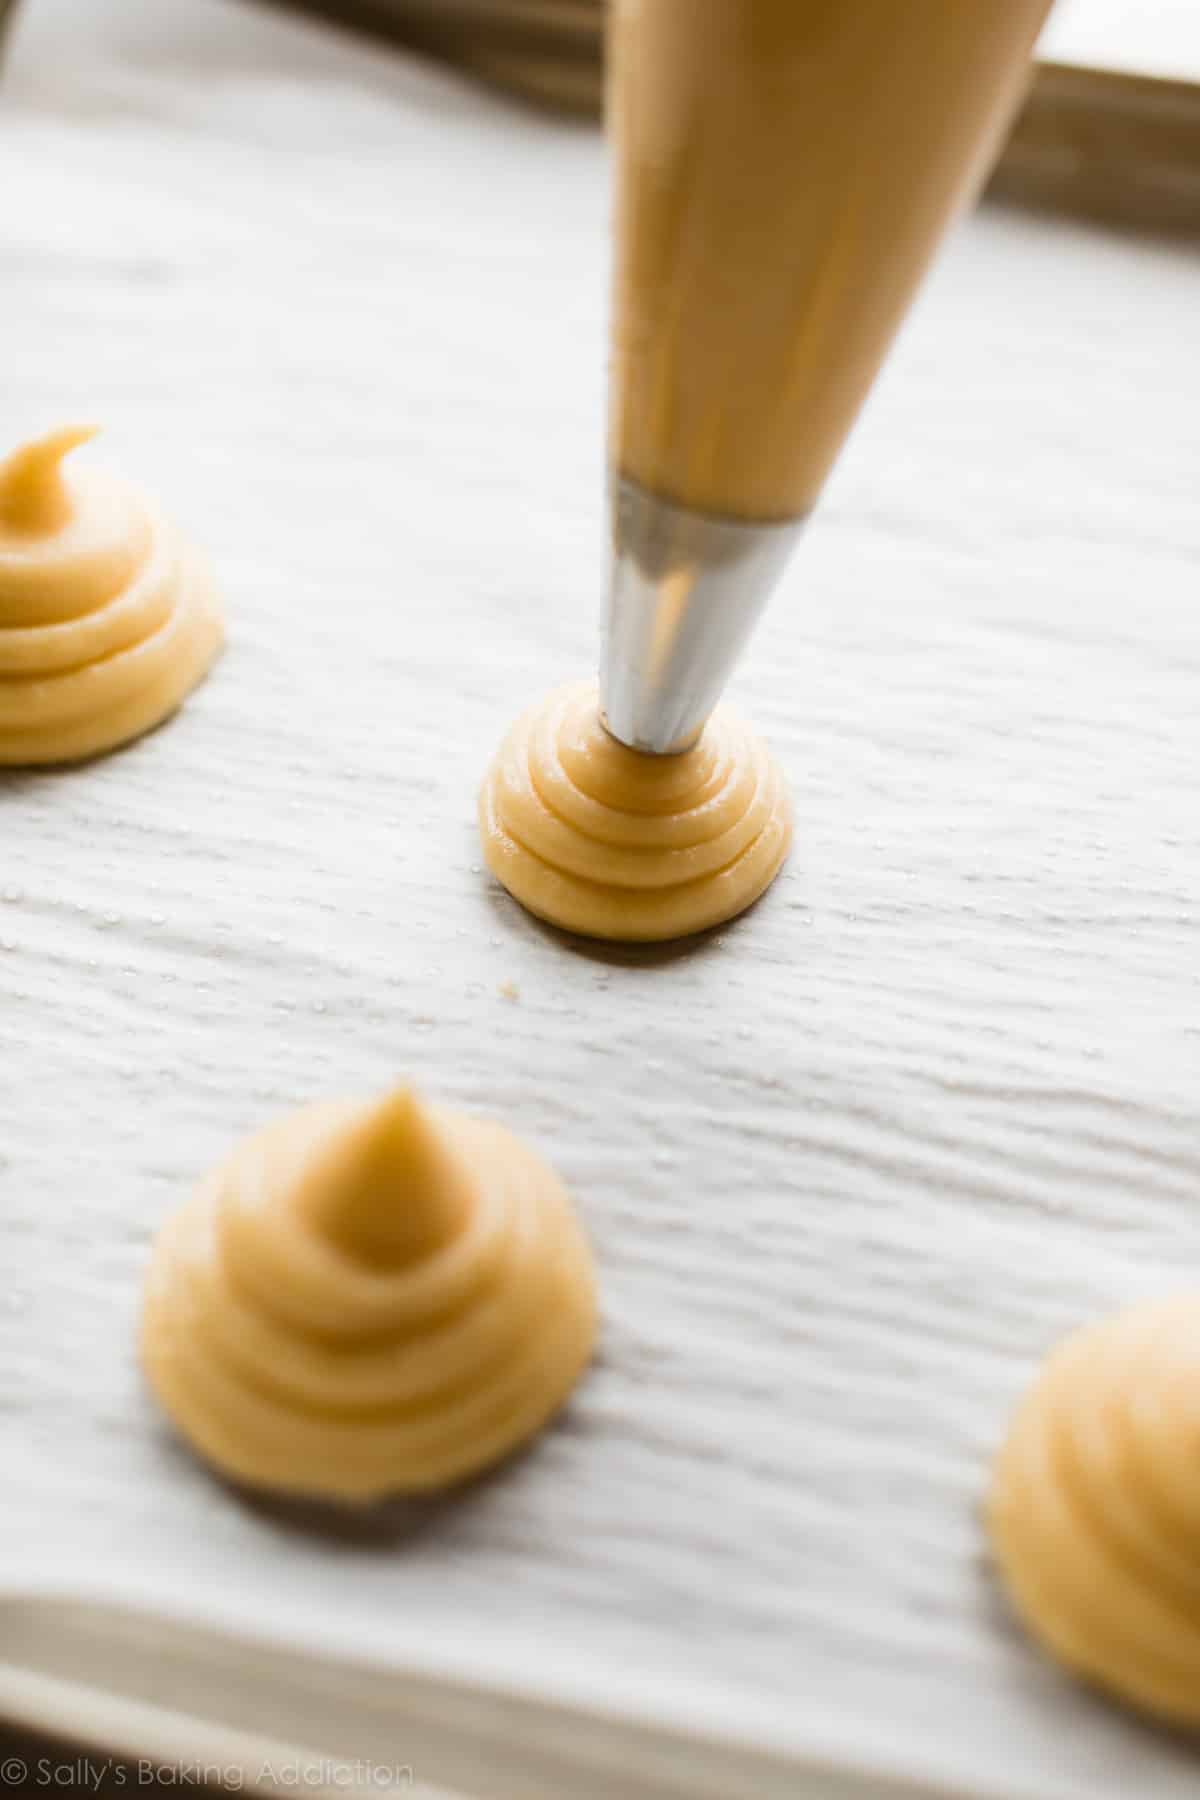 piping choux pastry onto a baking sheet lined with parchment paper